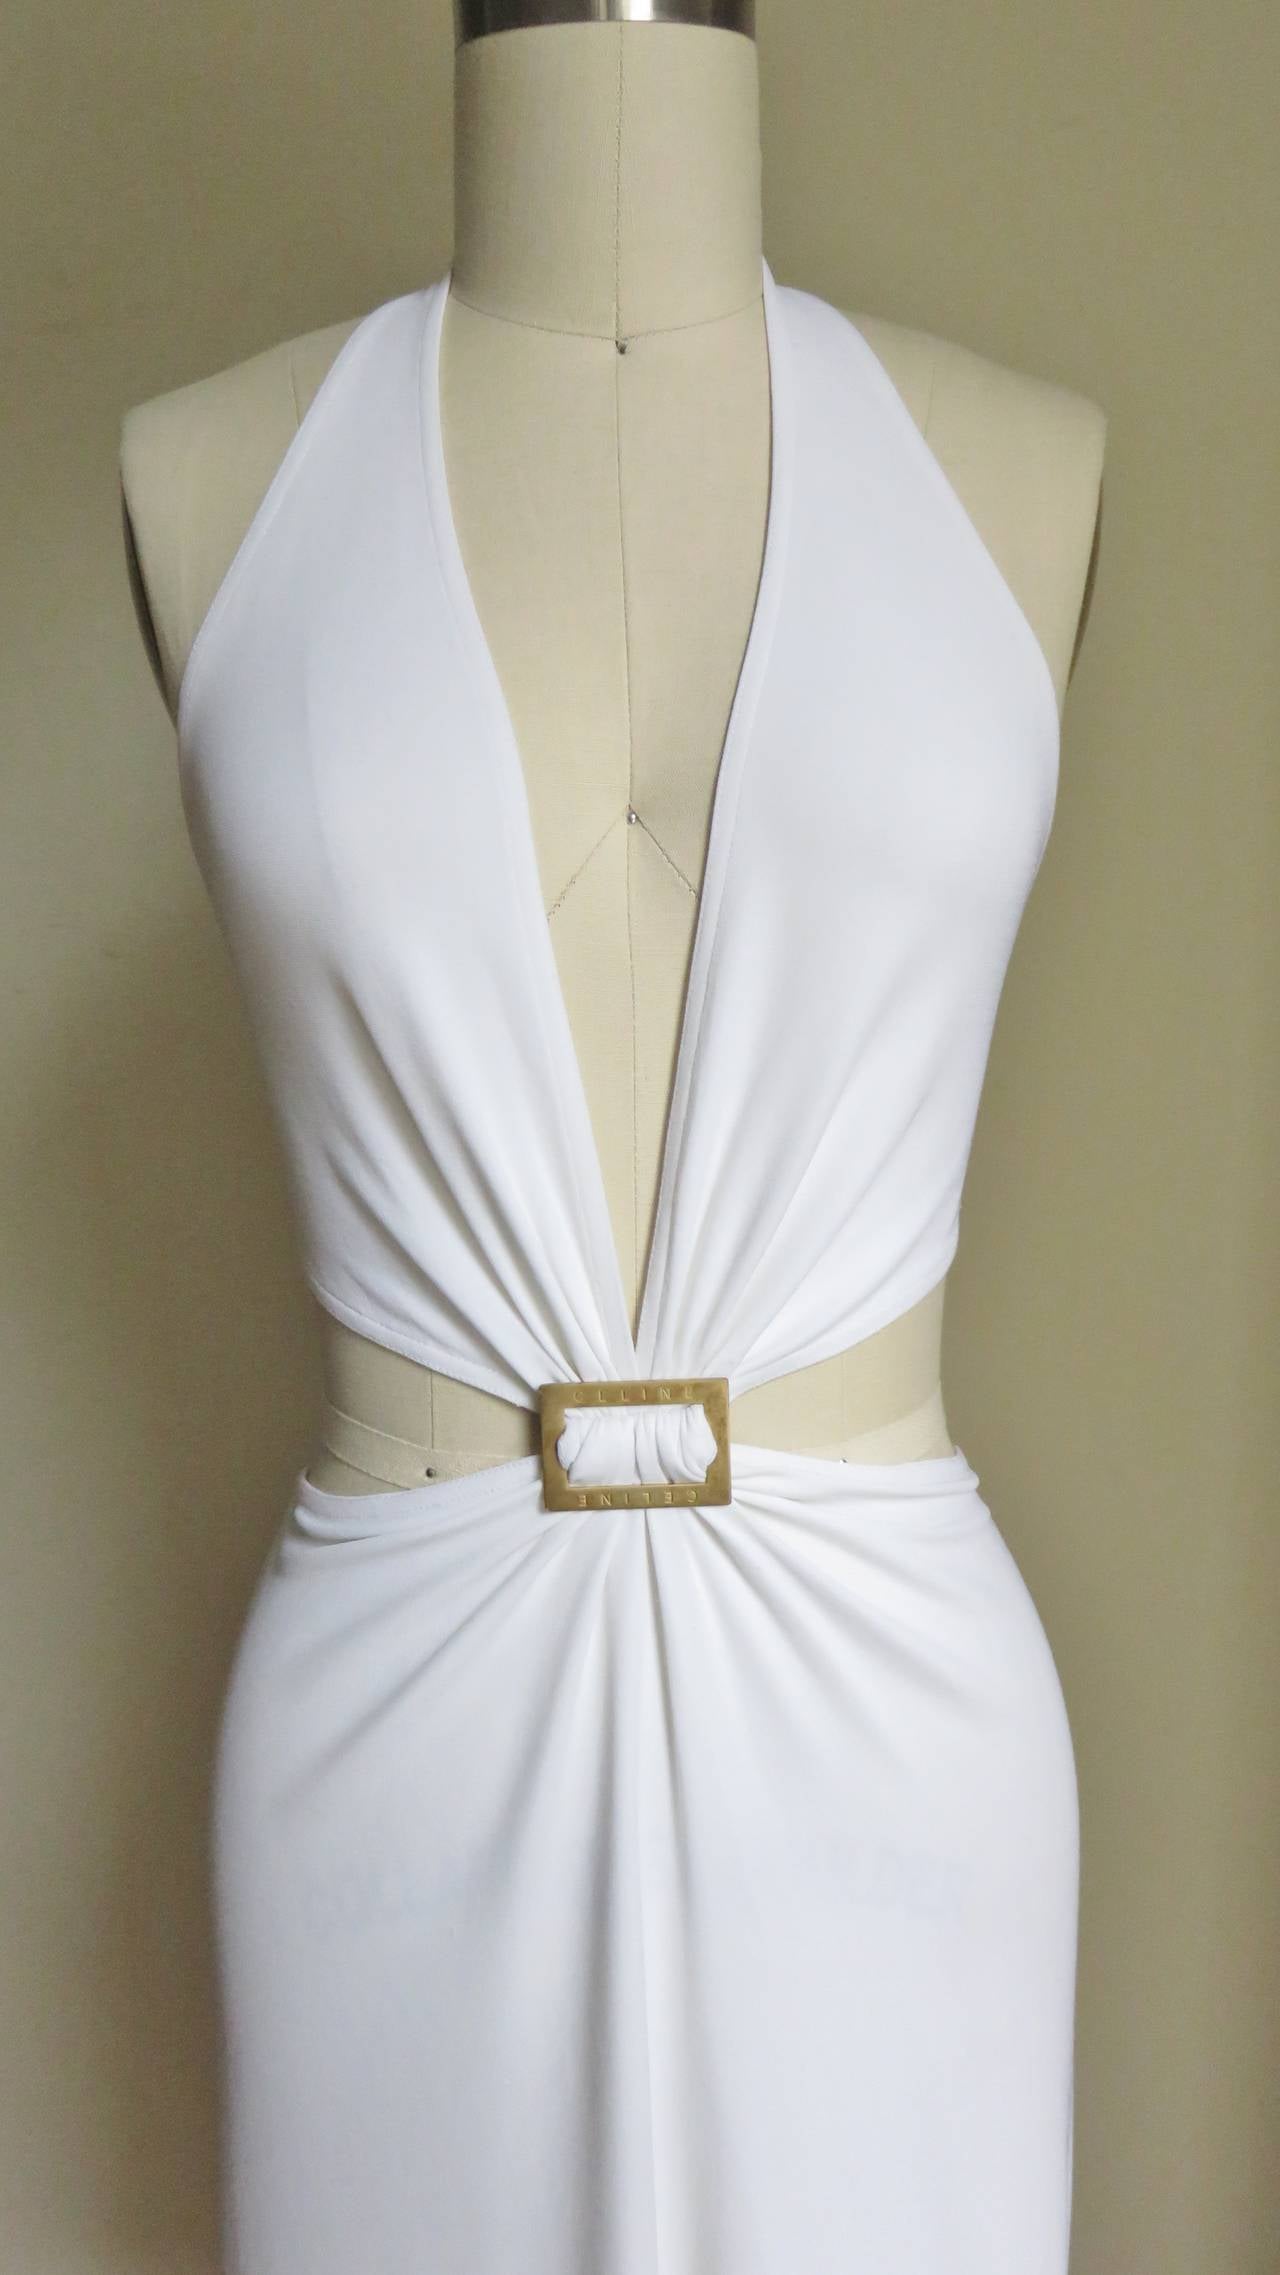 An incredible white silk jersey dress from Celine.  It has a deep plunging halter top which is joined to the skirt only at the center front gathered onto a Celine engraved burnished gold metal rectangle.  The sides are cutout and the back is bare to